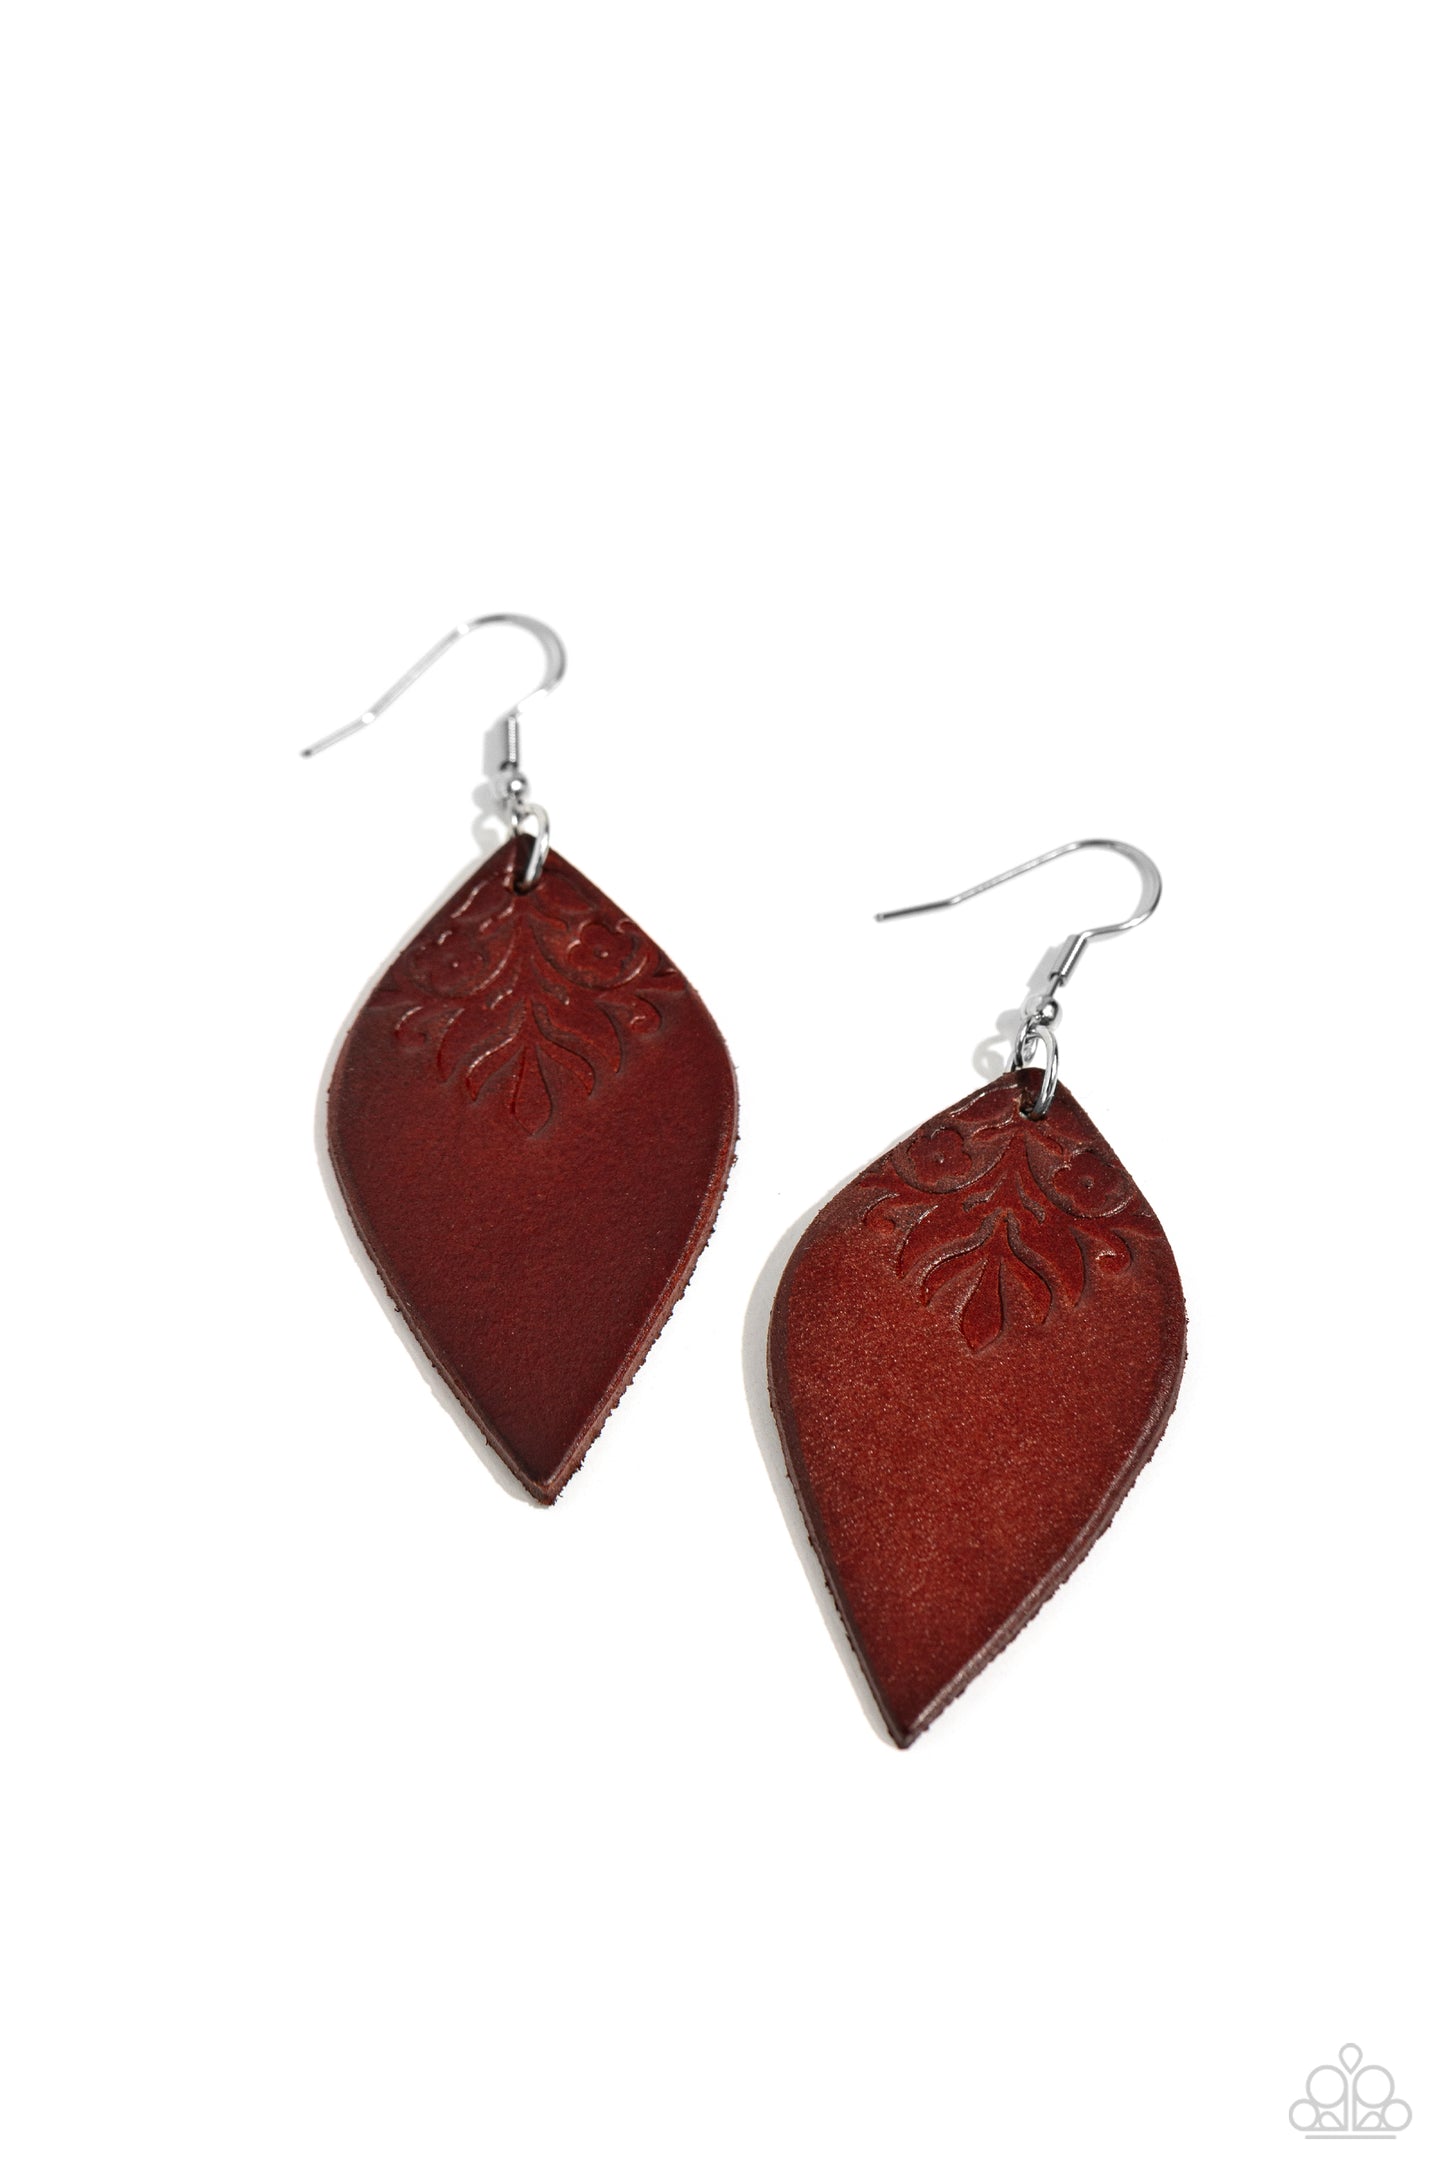 Naturally Nostalgic Paparazzi Accessories Earrings - Brown